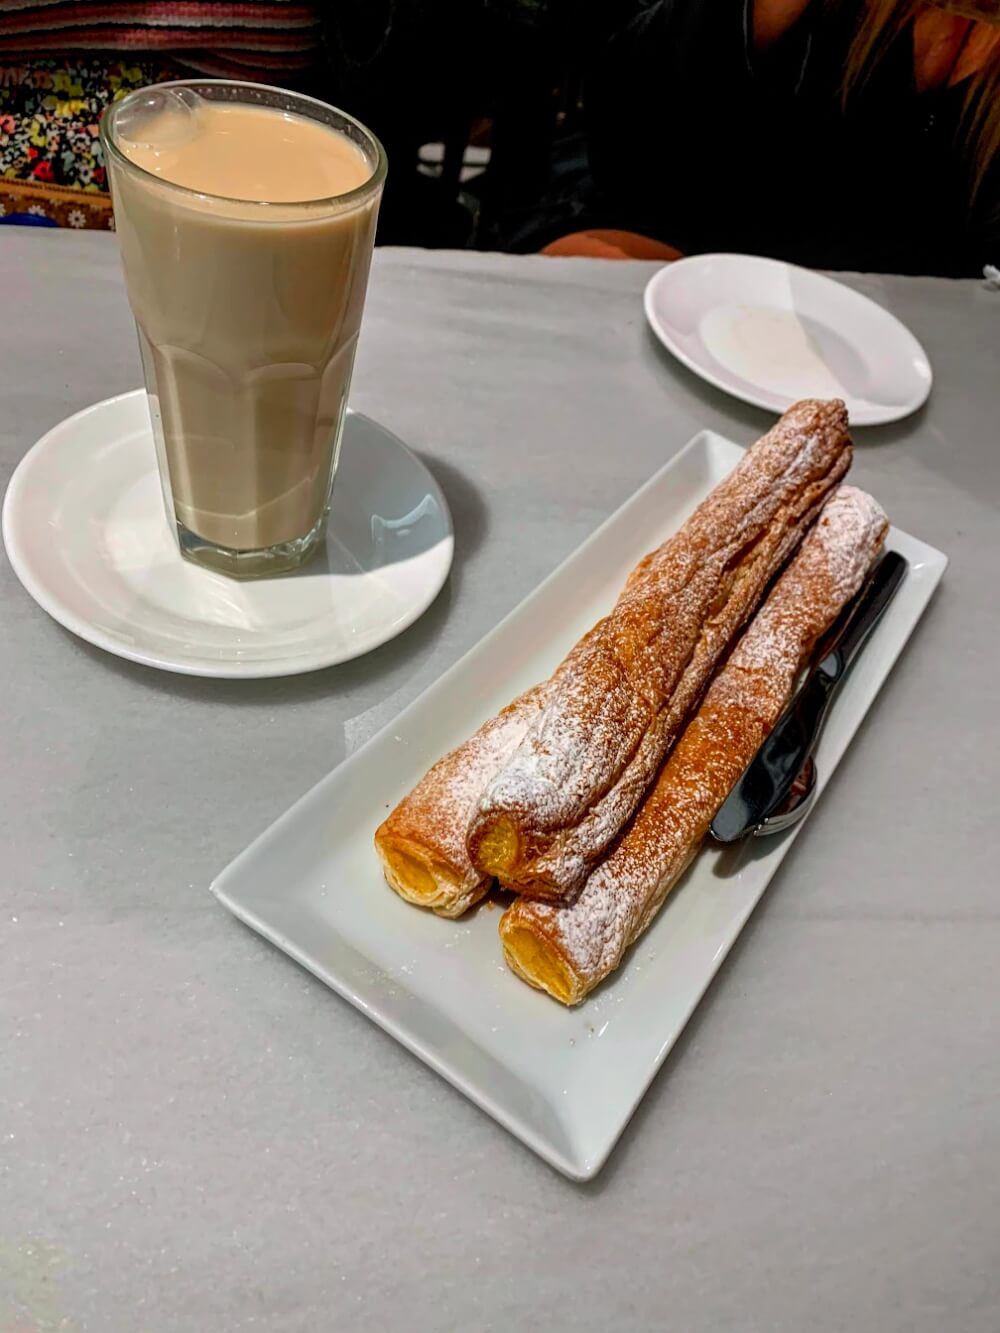 A tan drink (horchata) and a plate of three long circular pastries